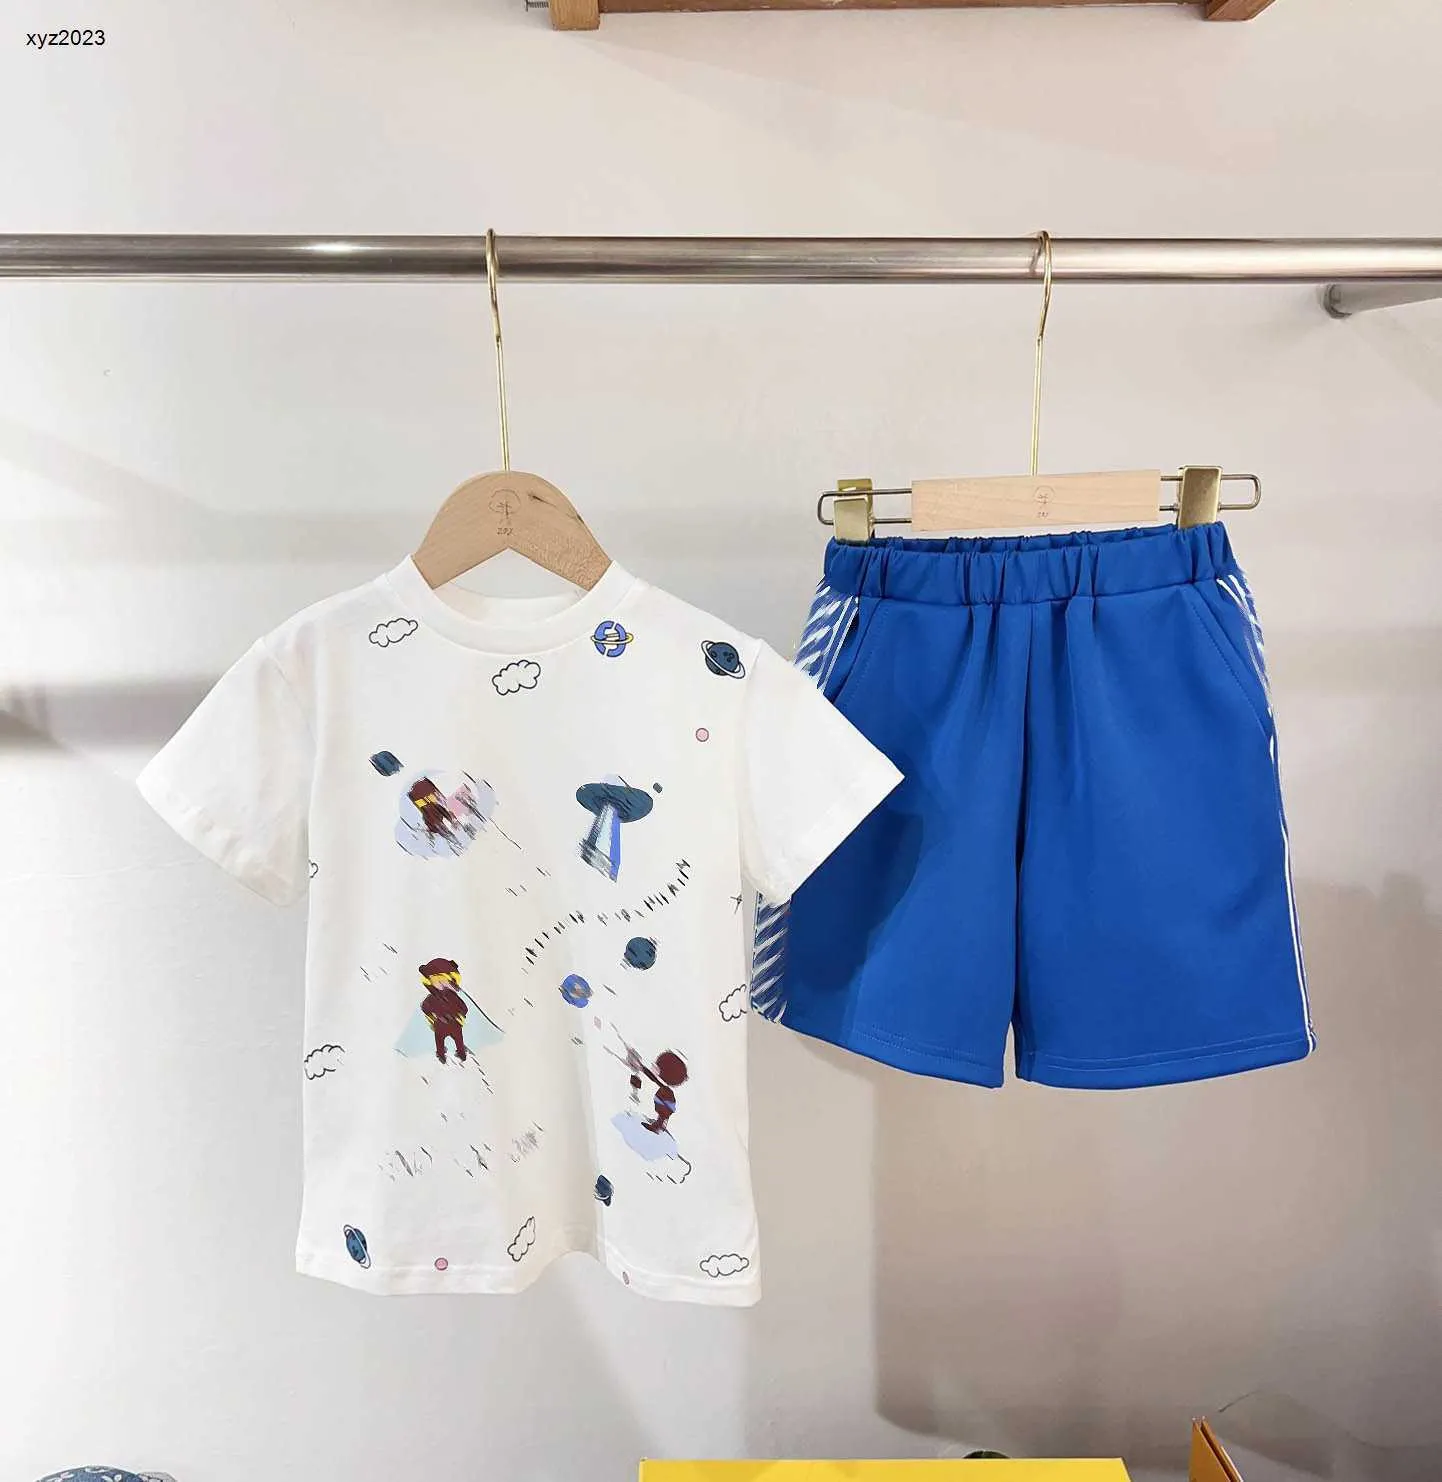 Fashion baby tracksuits boys Short sleeved suit kids designer clothes Size 100-160 CM UFO pattern printed T-shirt and blue shorts 24April